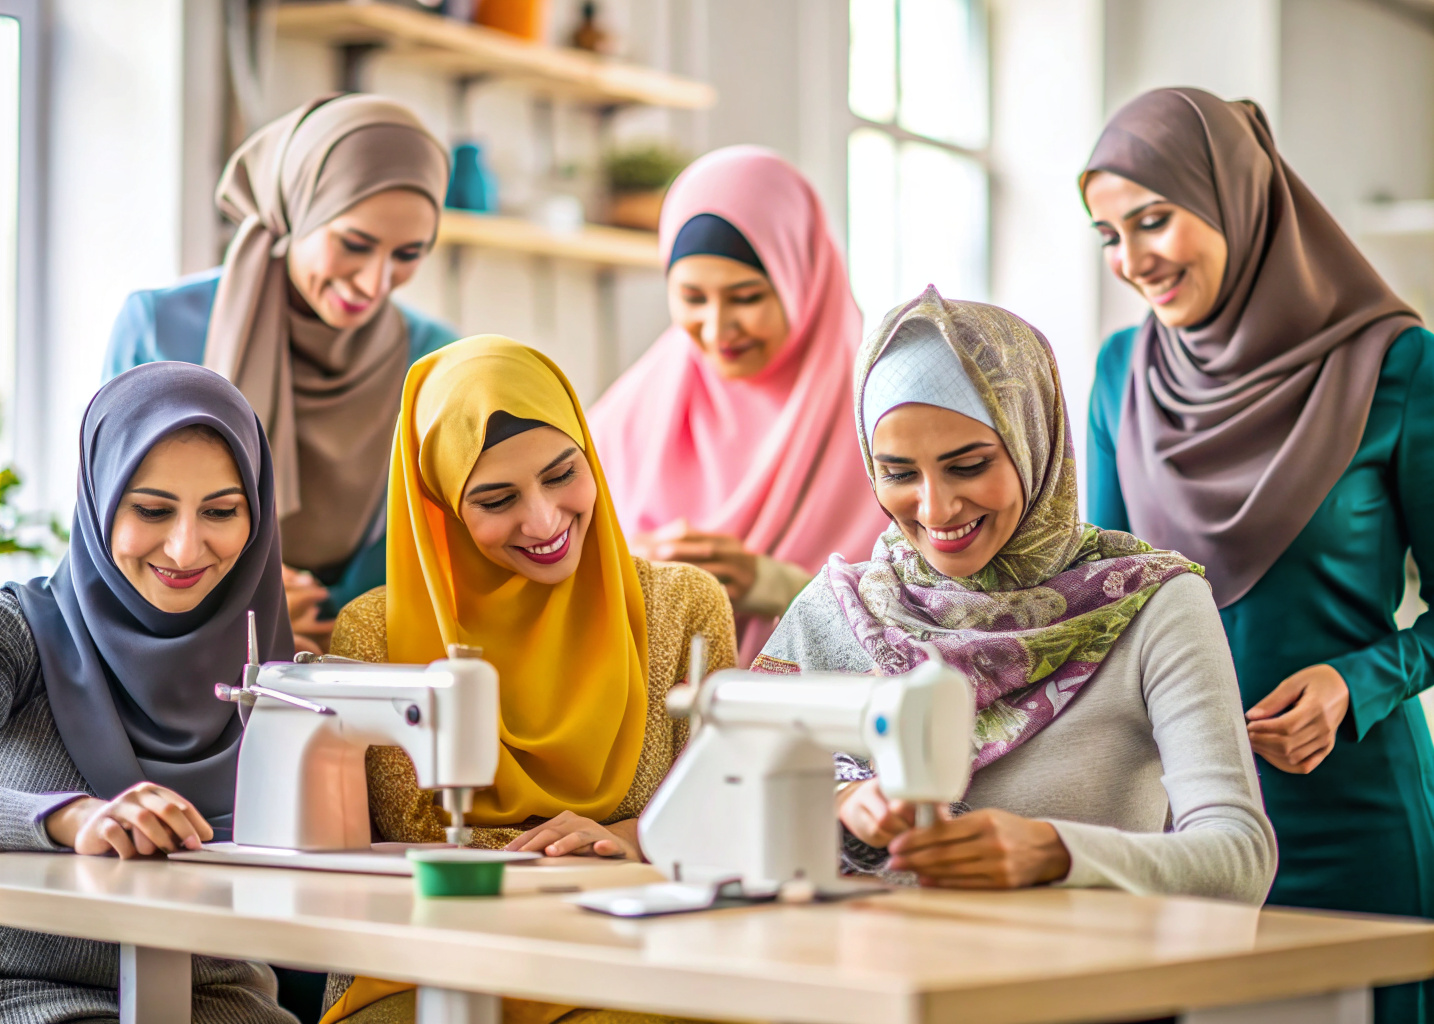 group of people of young and middle ages, women, some of them but not all are in a hijab, having fun sewing in a bright, modern workshop. Detailed and realistic image